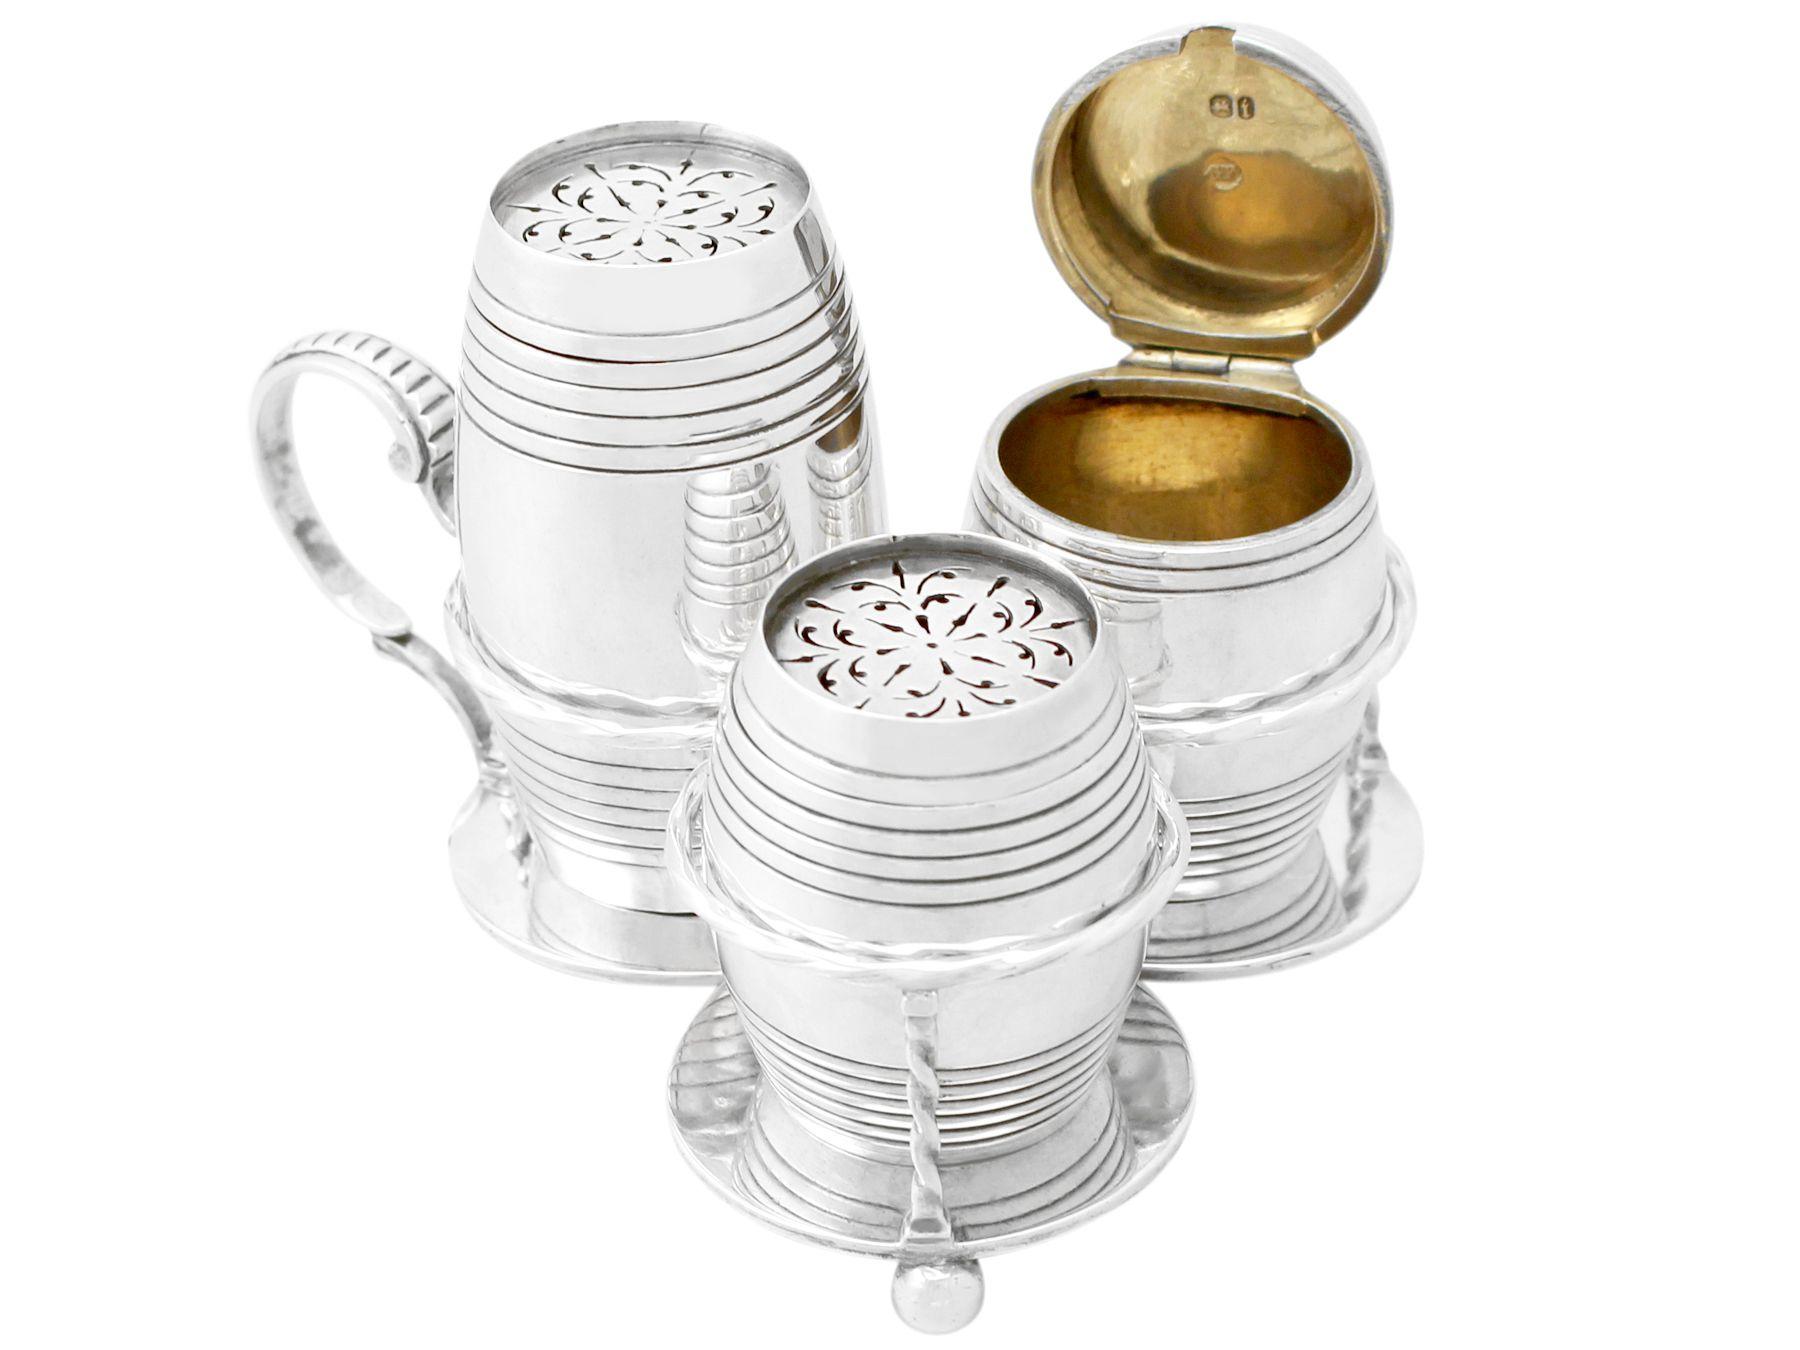 George Fox Victorian English Sterling Silver Cruet Set In Excellent Condition For Sale In Jesmond, Newcastle Upon Tyne